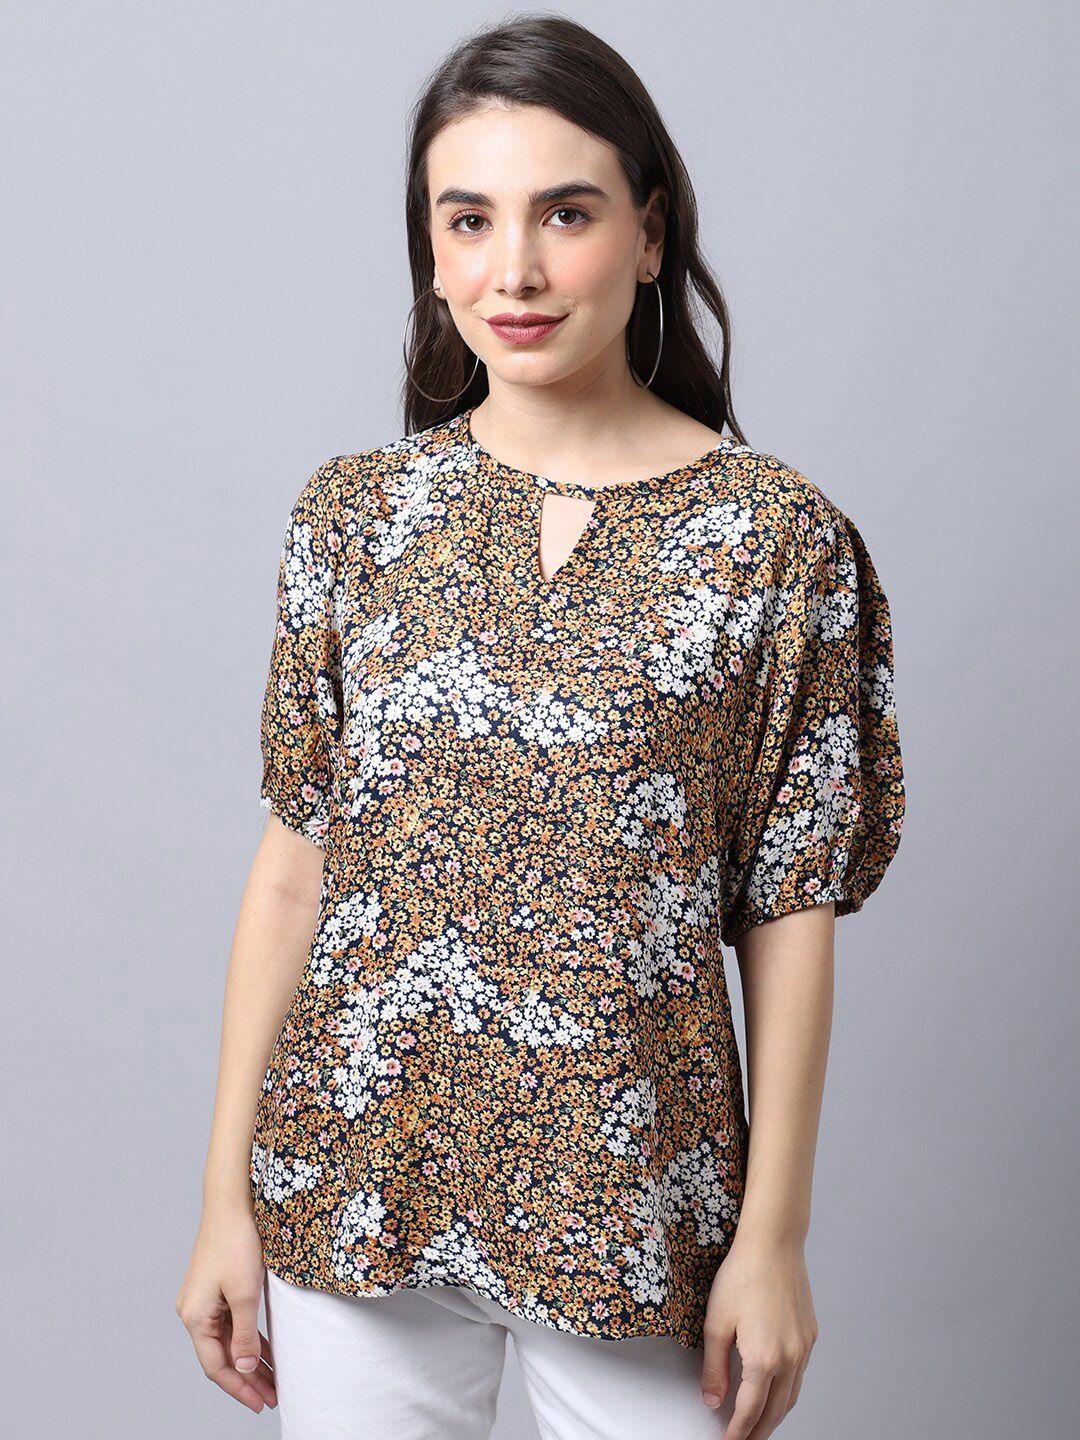 cantabil-yellow-&-white-floral-printed-keyhole-neck-top